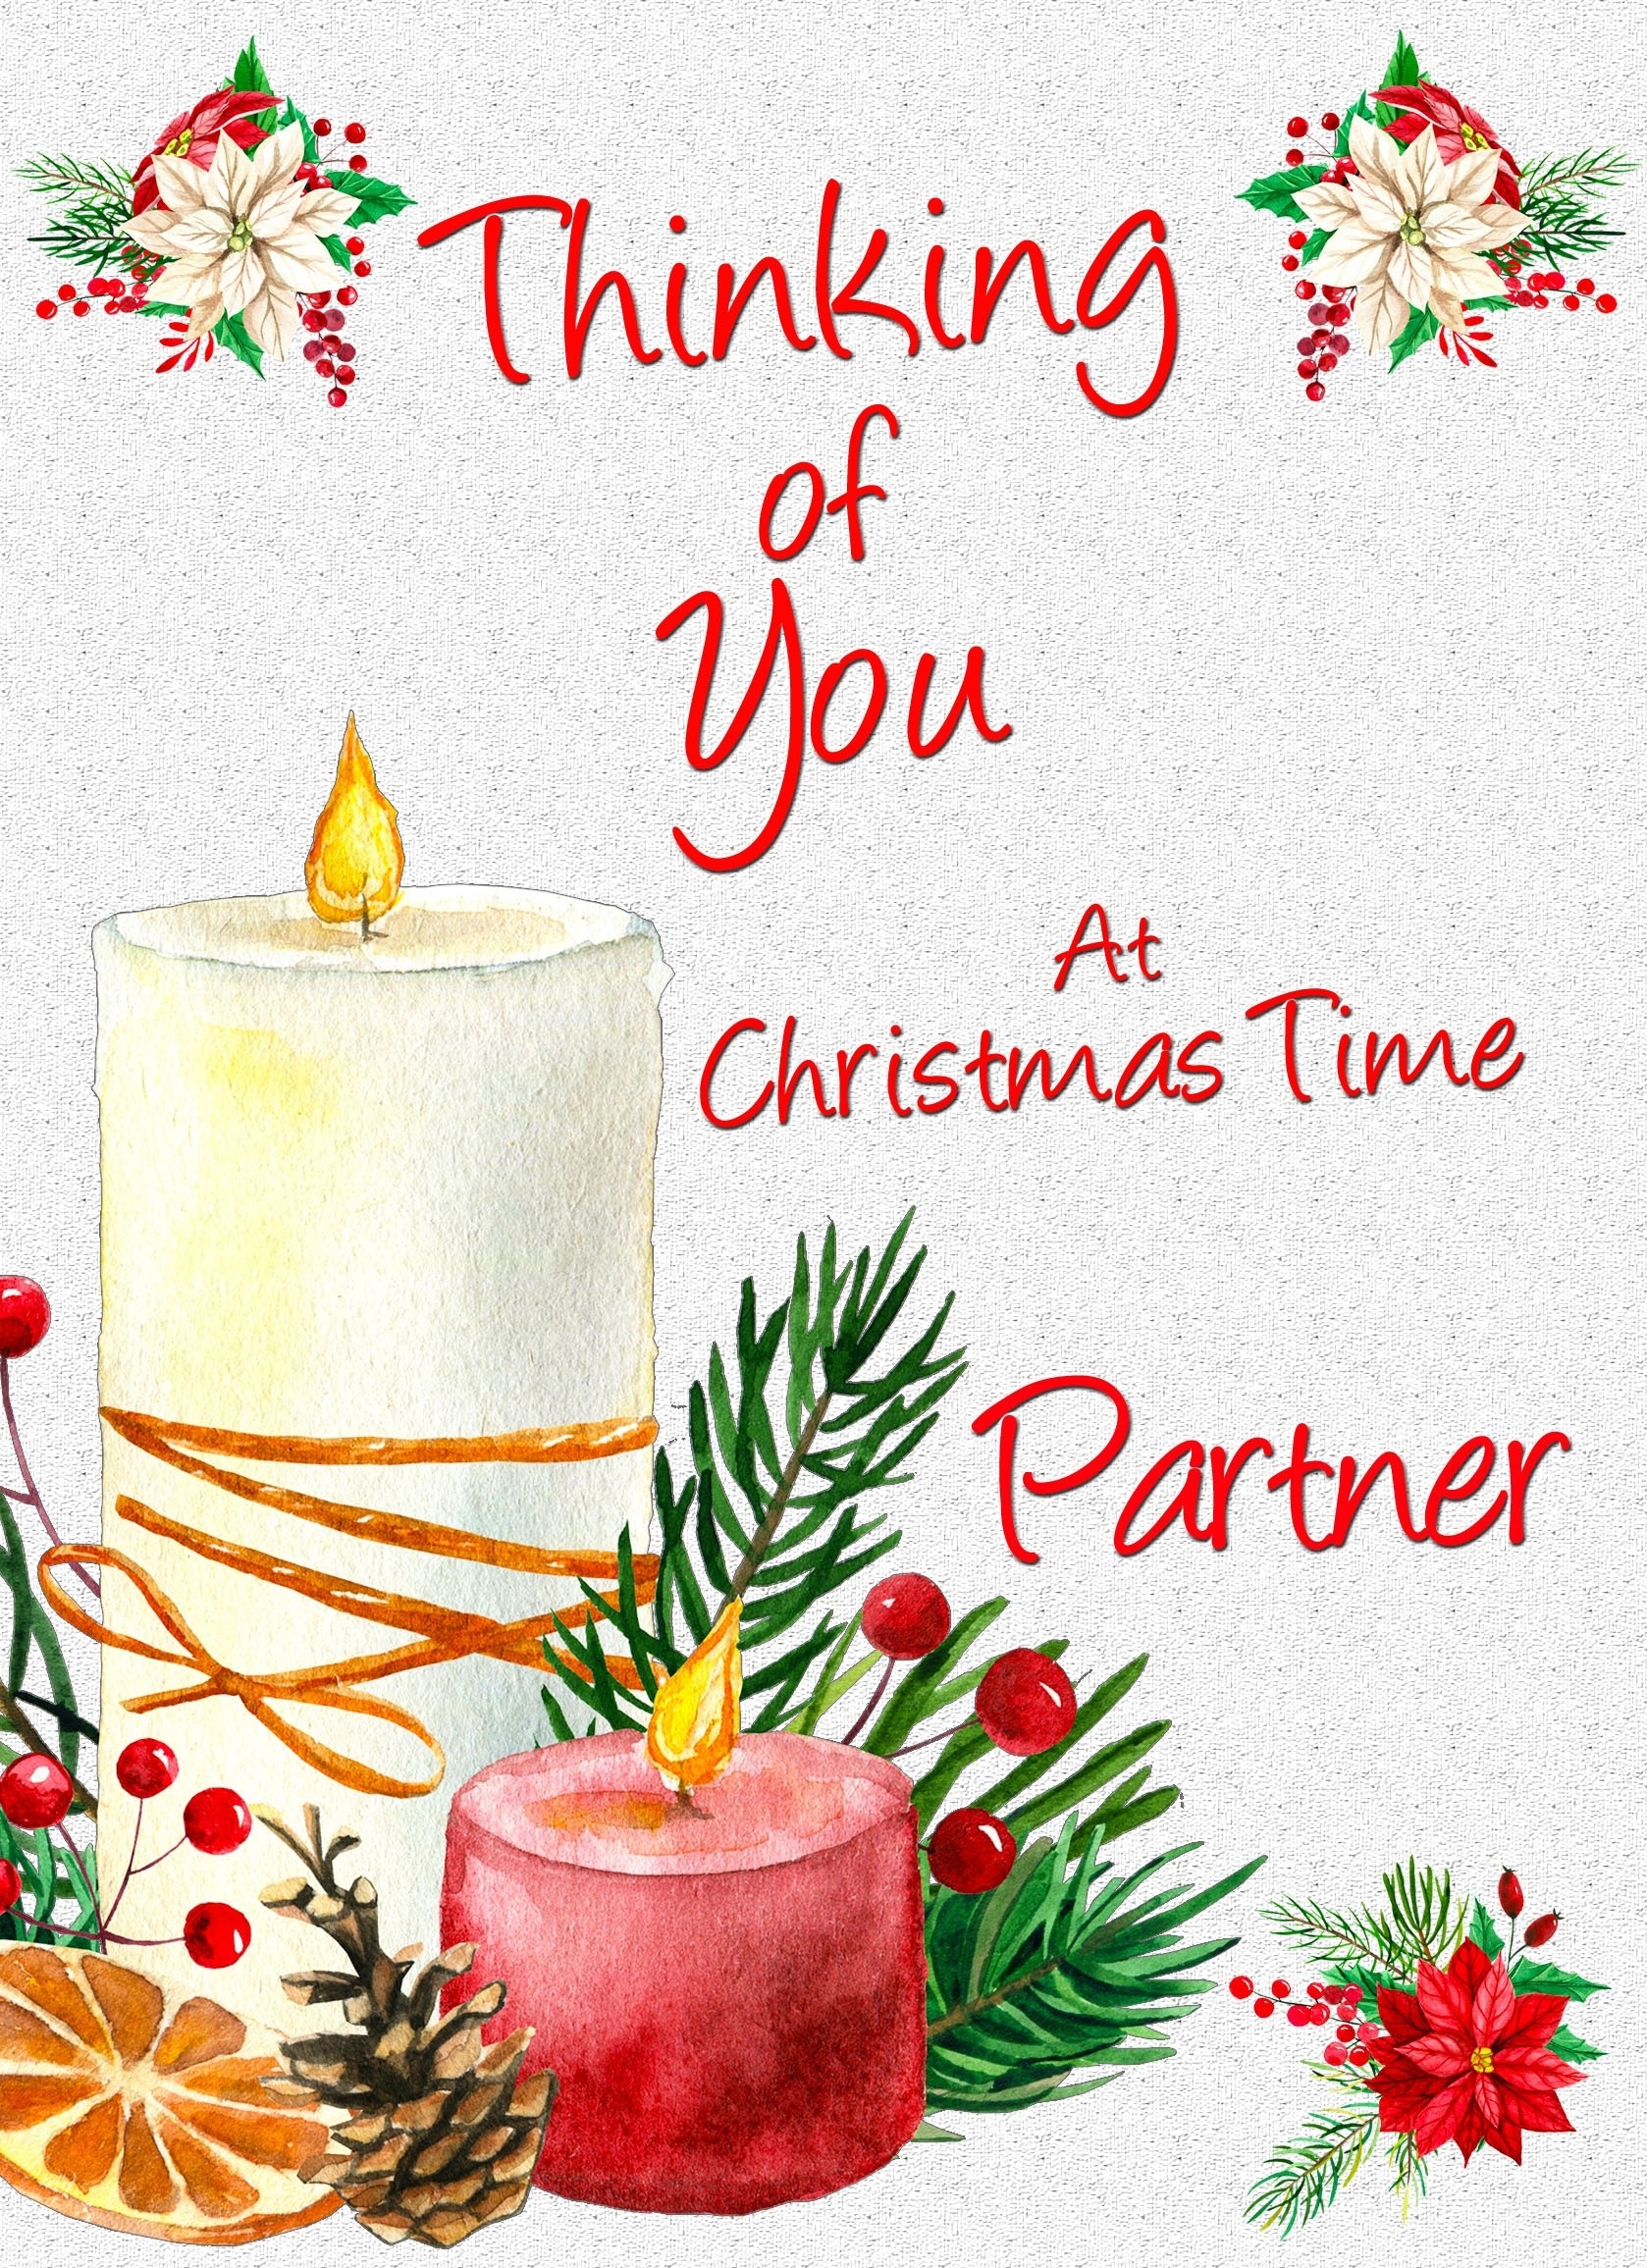 Thinking of You at Christmas Card For Partner (Candle)